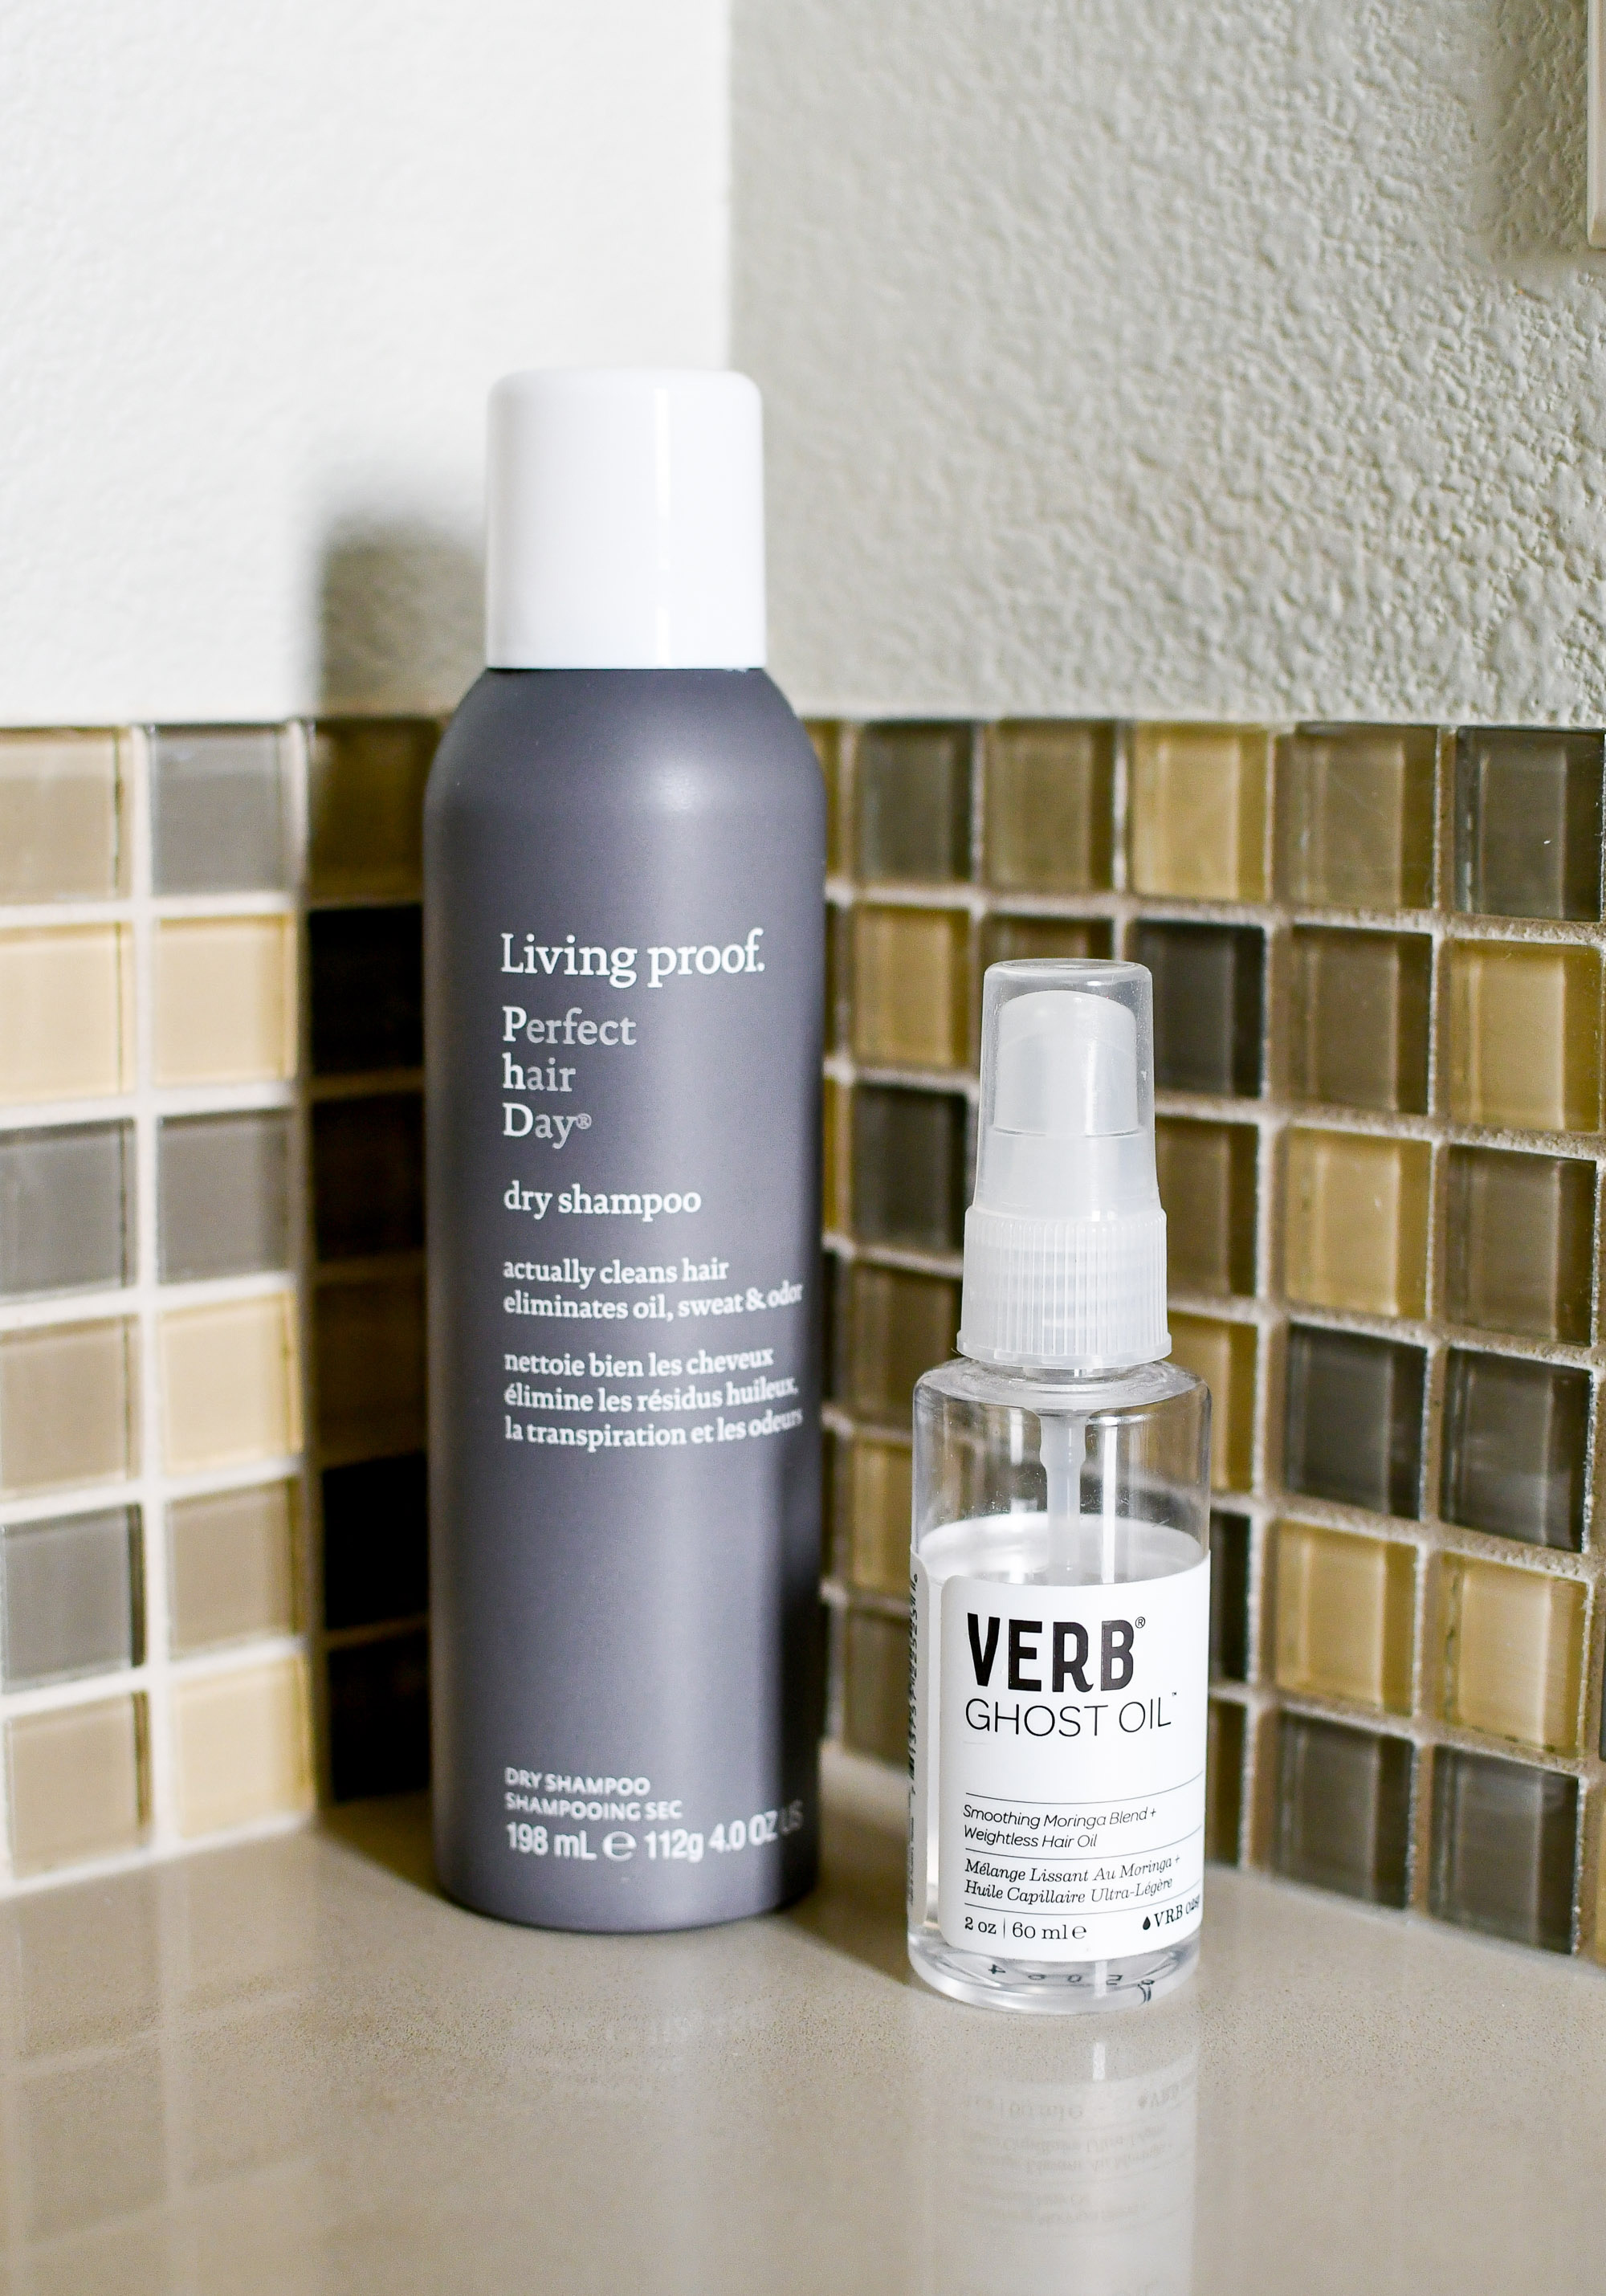 Living Proof dry shampoo and Verb ghost oil — Cotton Cashmere Cat Hair